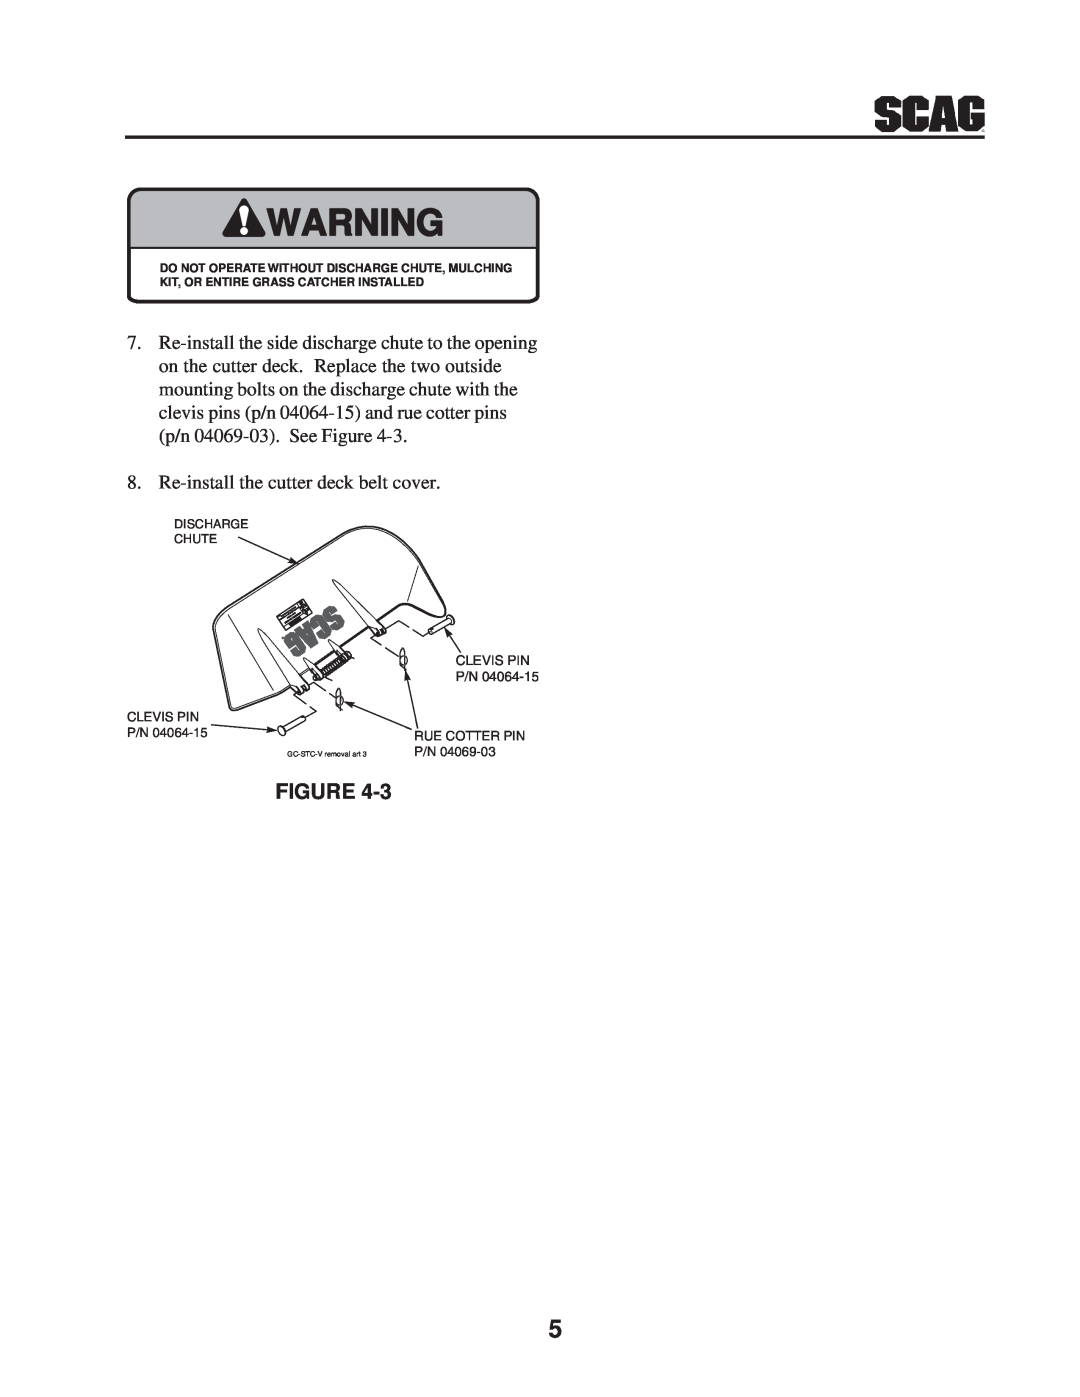 Scag Power Equipment GC-STWC-61V operating instructions Re-install the cutter deck belt cover 